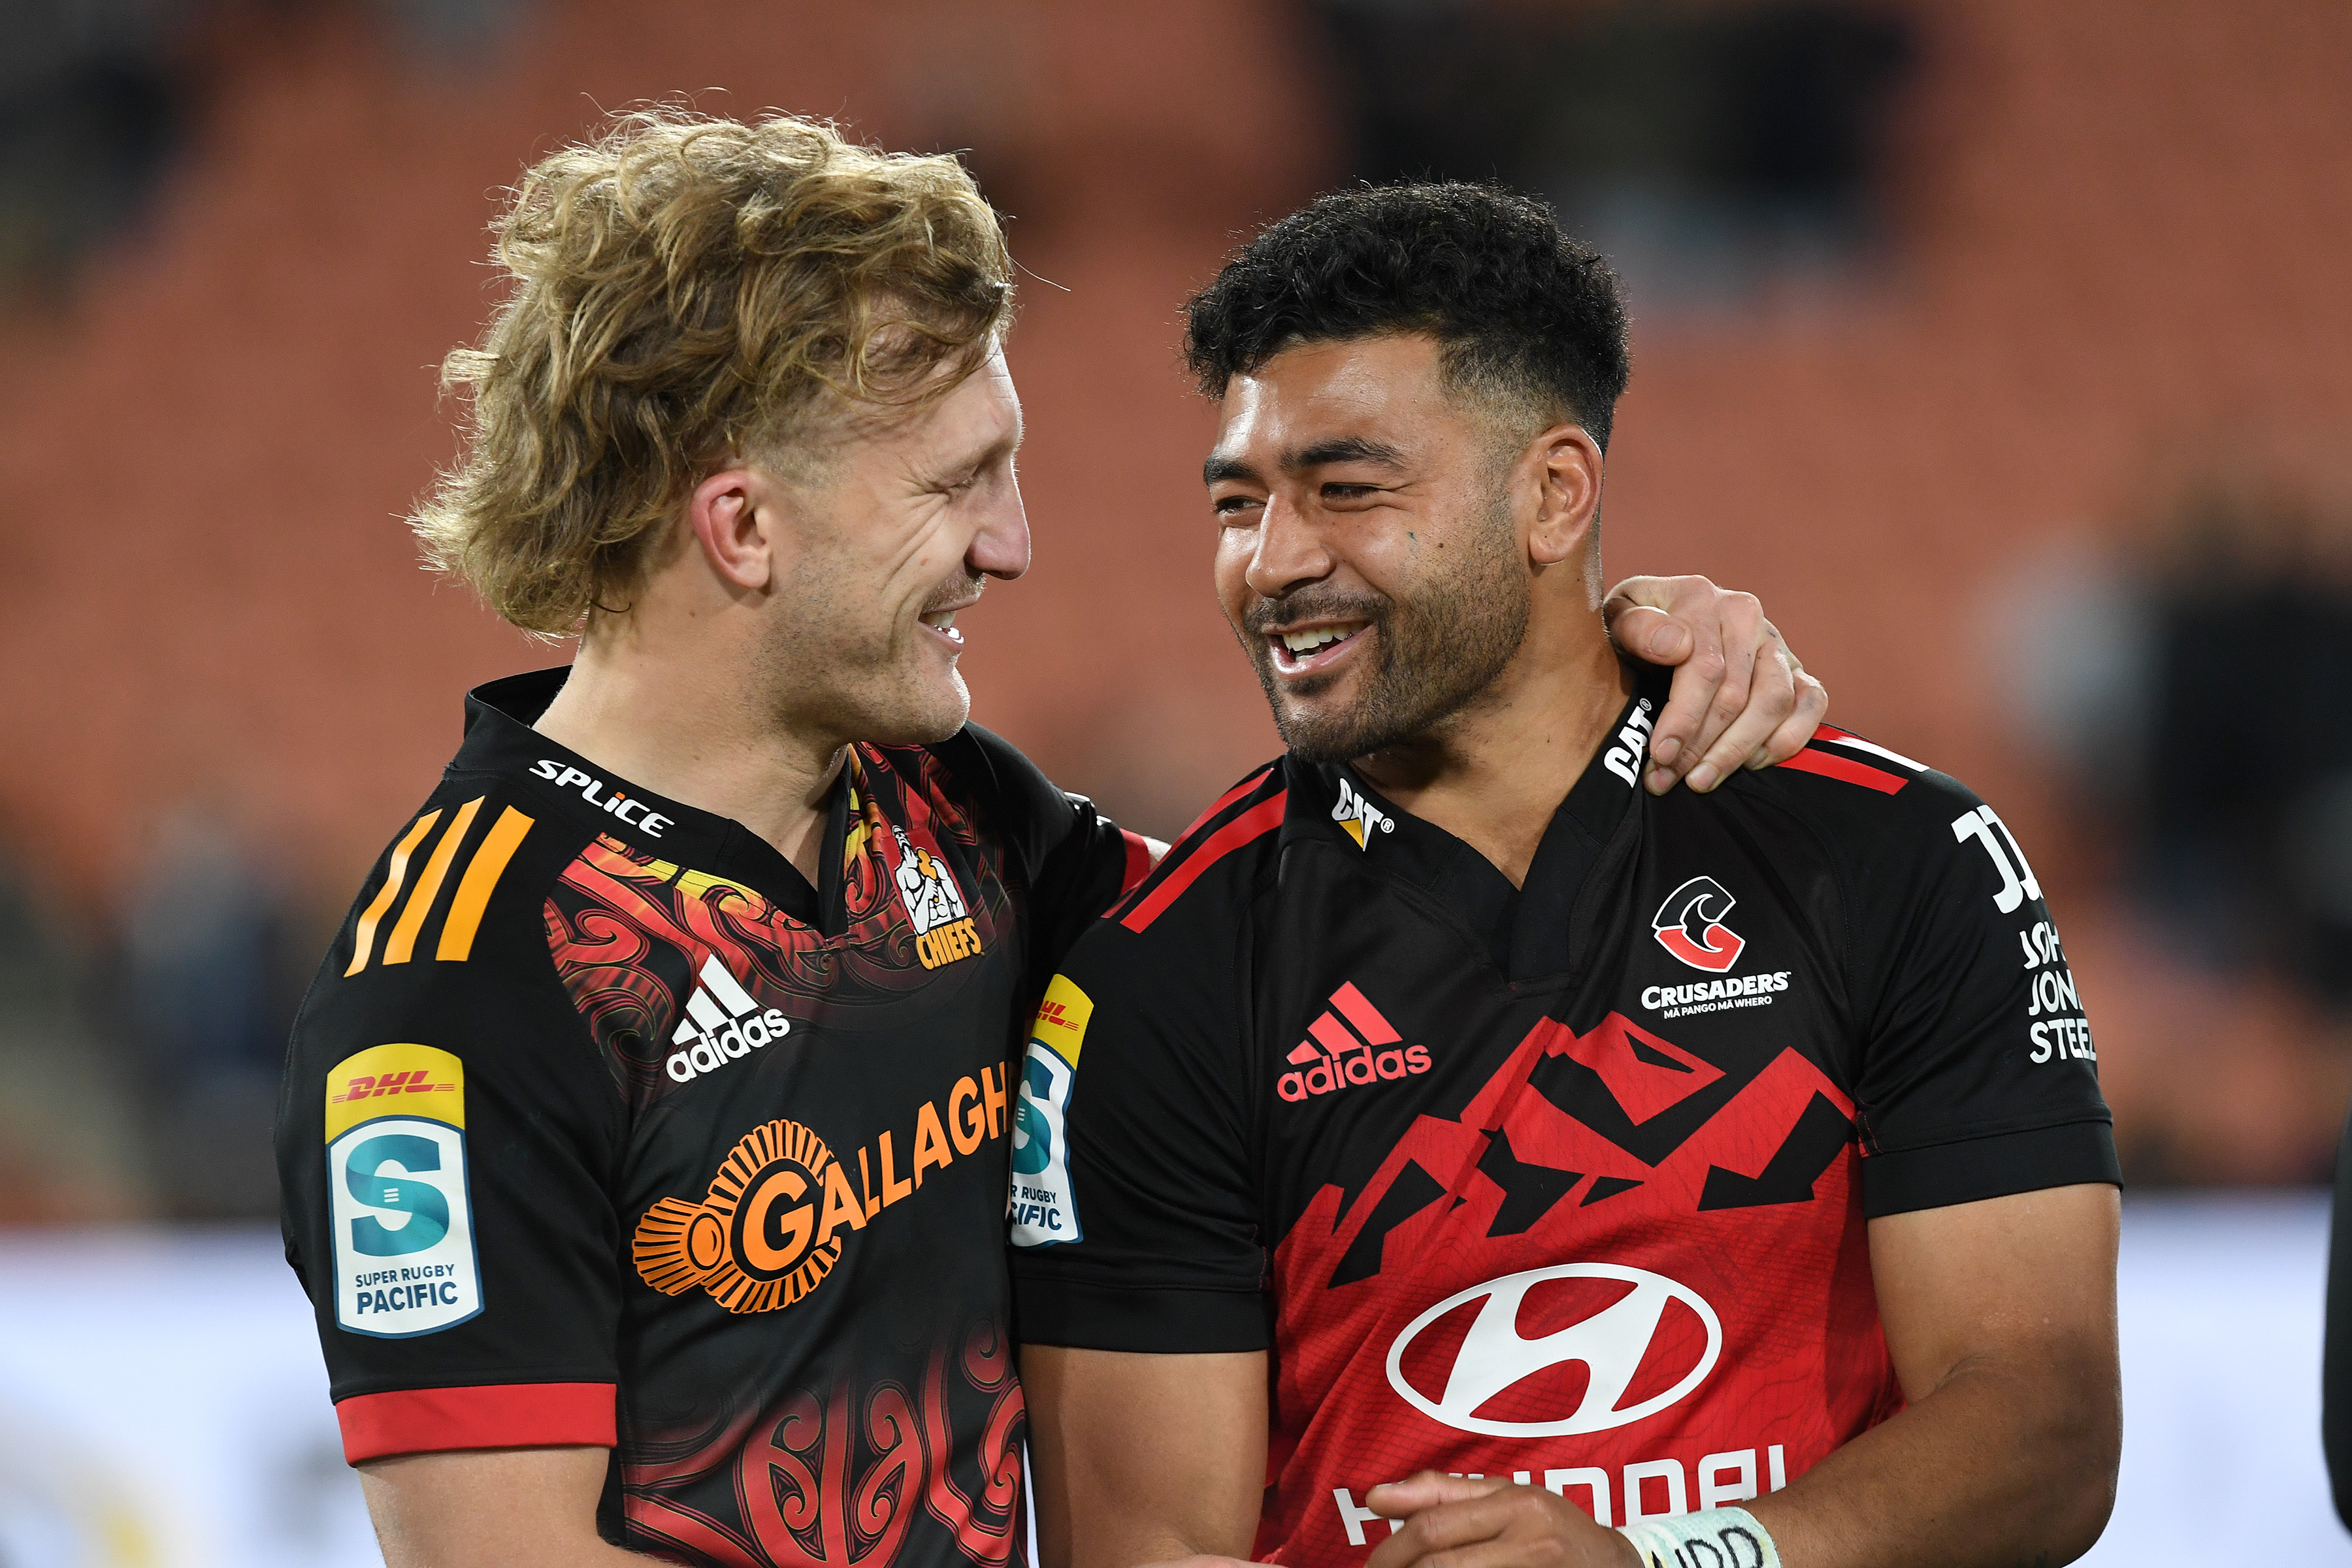 Super Rugby Pacific final Chiefs v Crusaders Kickoff time, how to watch in NZ, live streaming, teams, odds - all you need to know